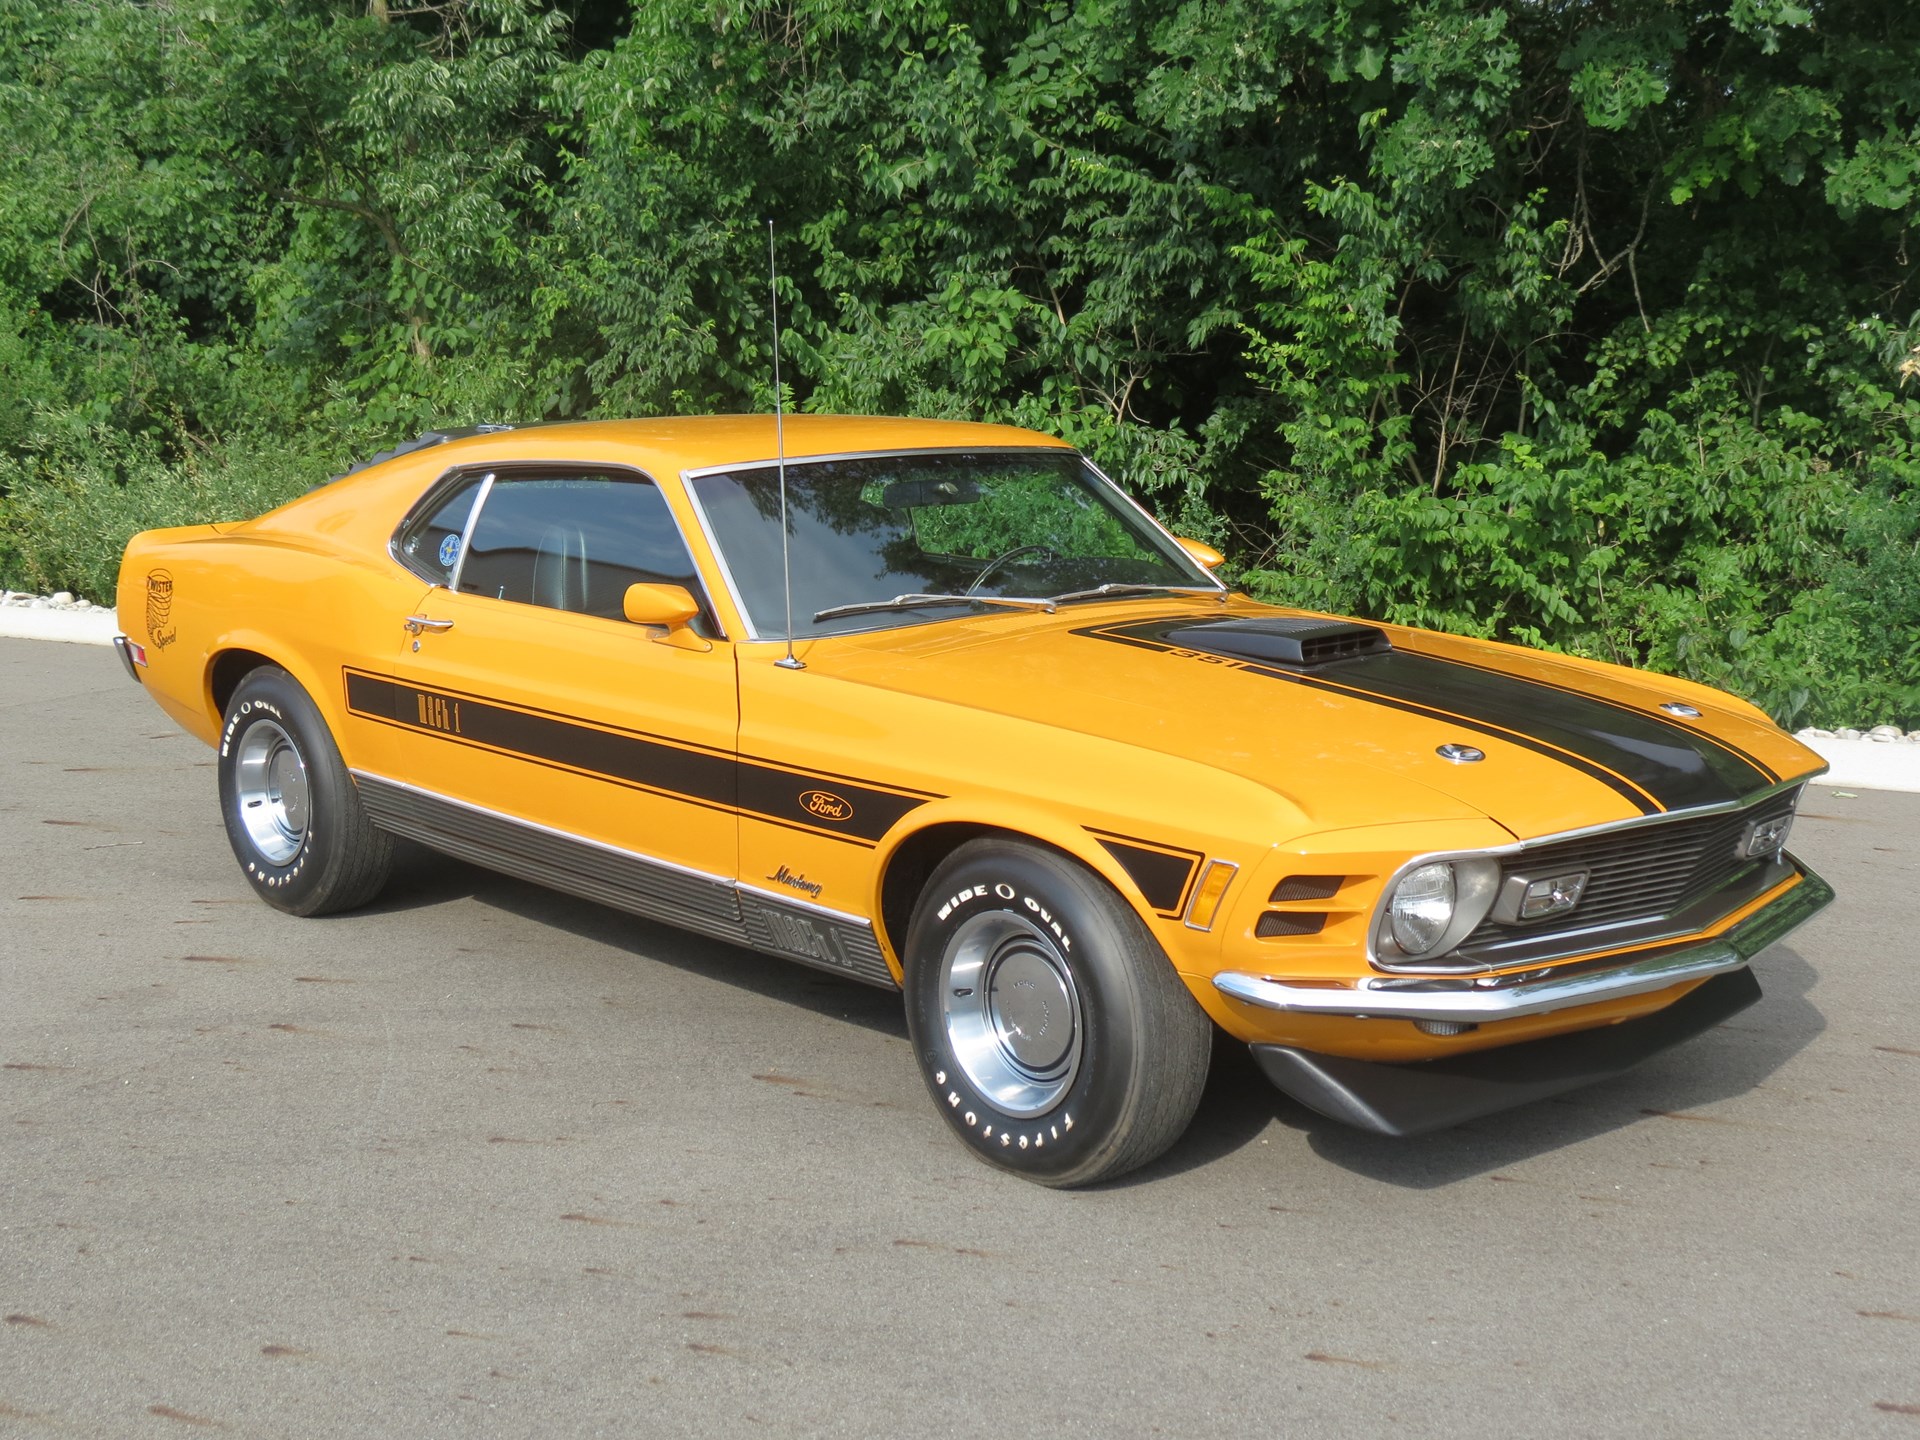 1970 Ford Mustang Mach 1 Twister Special | Auburn Fall 2021 | RM Sotheby's